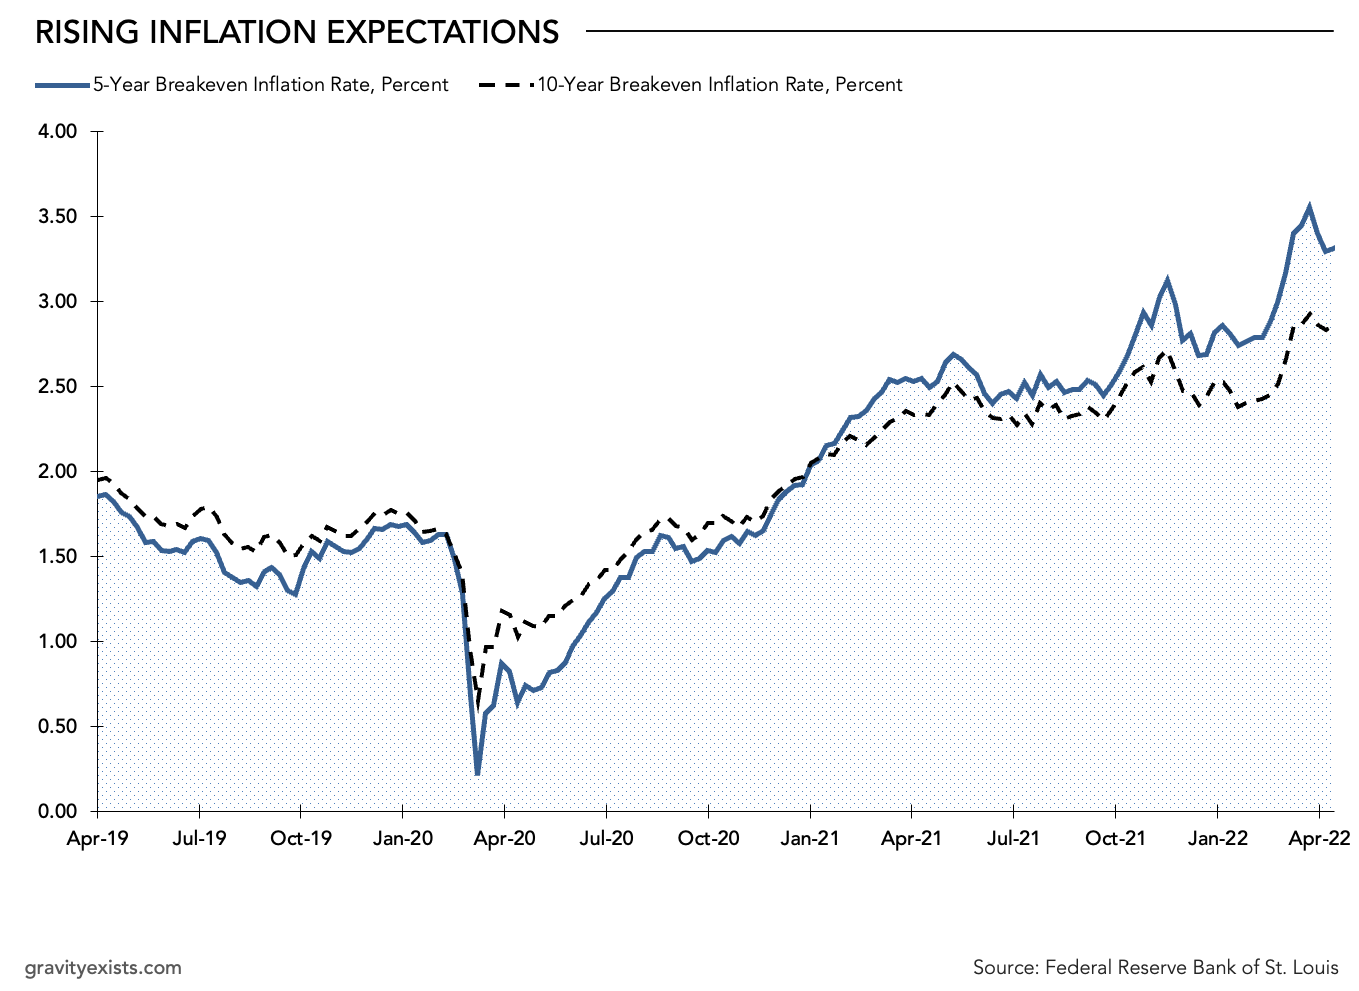 The 5- and 10-year inflation expectations implied by the spread between US Treasury Bonds and Treasury Inflation Protected Securities (TIPS) remain lower than 3.5%. While well above multi-year averages, this represents confidence that current inflation levels will moderate in the near-term. 
